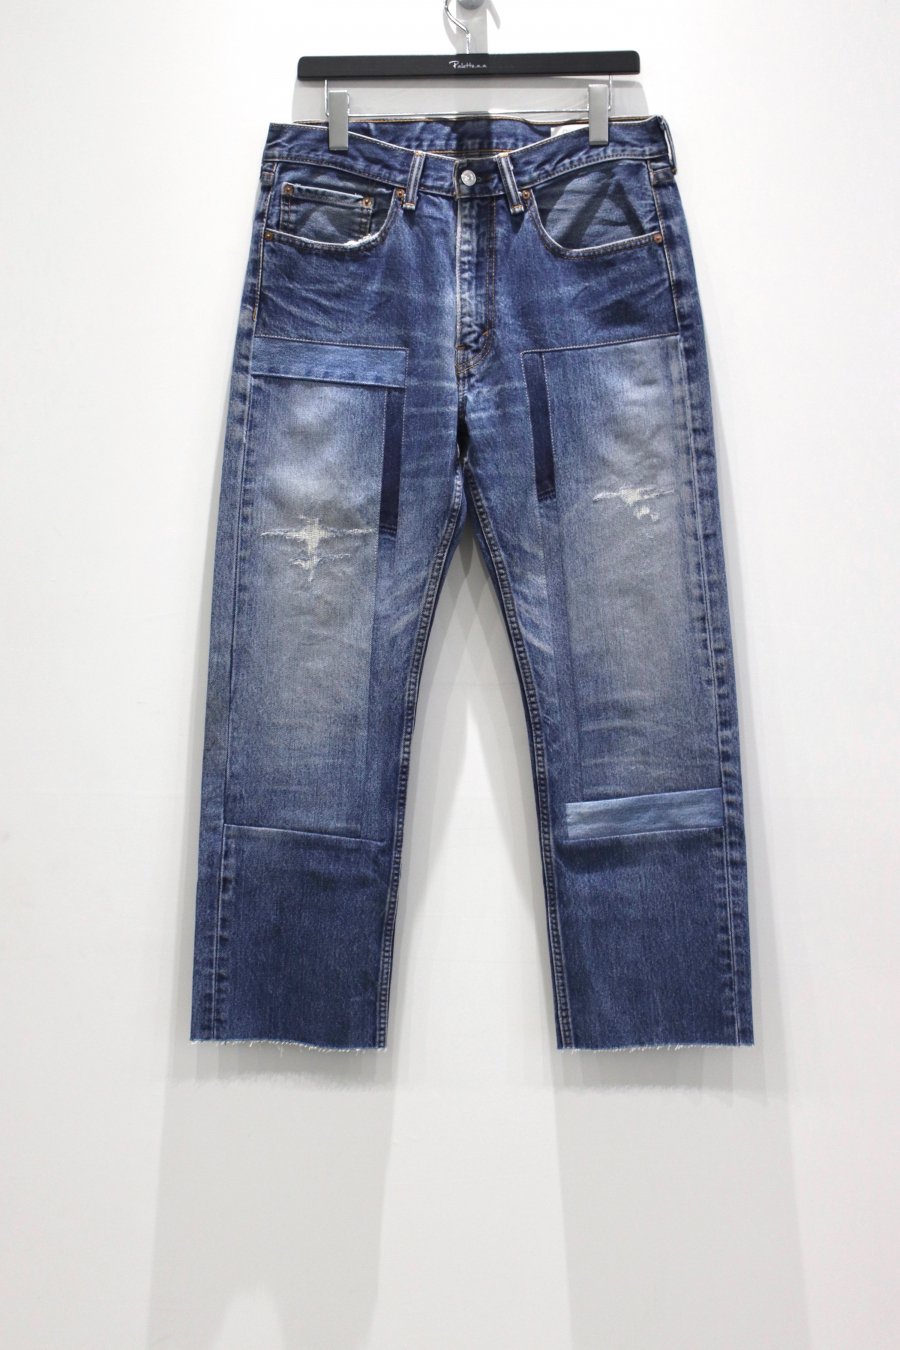 Children of the discordance  NY VINTAGE CUSTOMMADE PATCH DENIM C<img class='new_mark_img2' src='https://img.shop-pro.jp/img/new/icons15.gif' style='border:none;display:inline;margin:0px;padding:0px;width:auto;' />